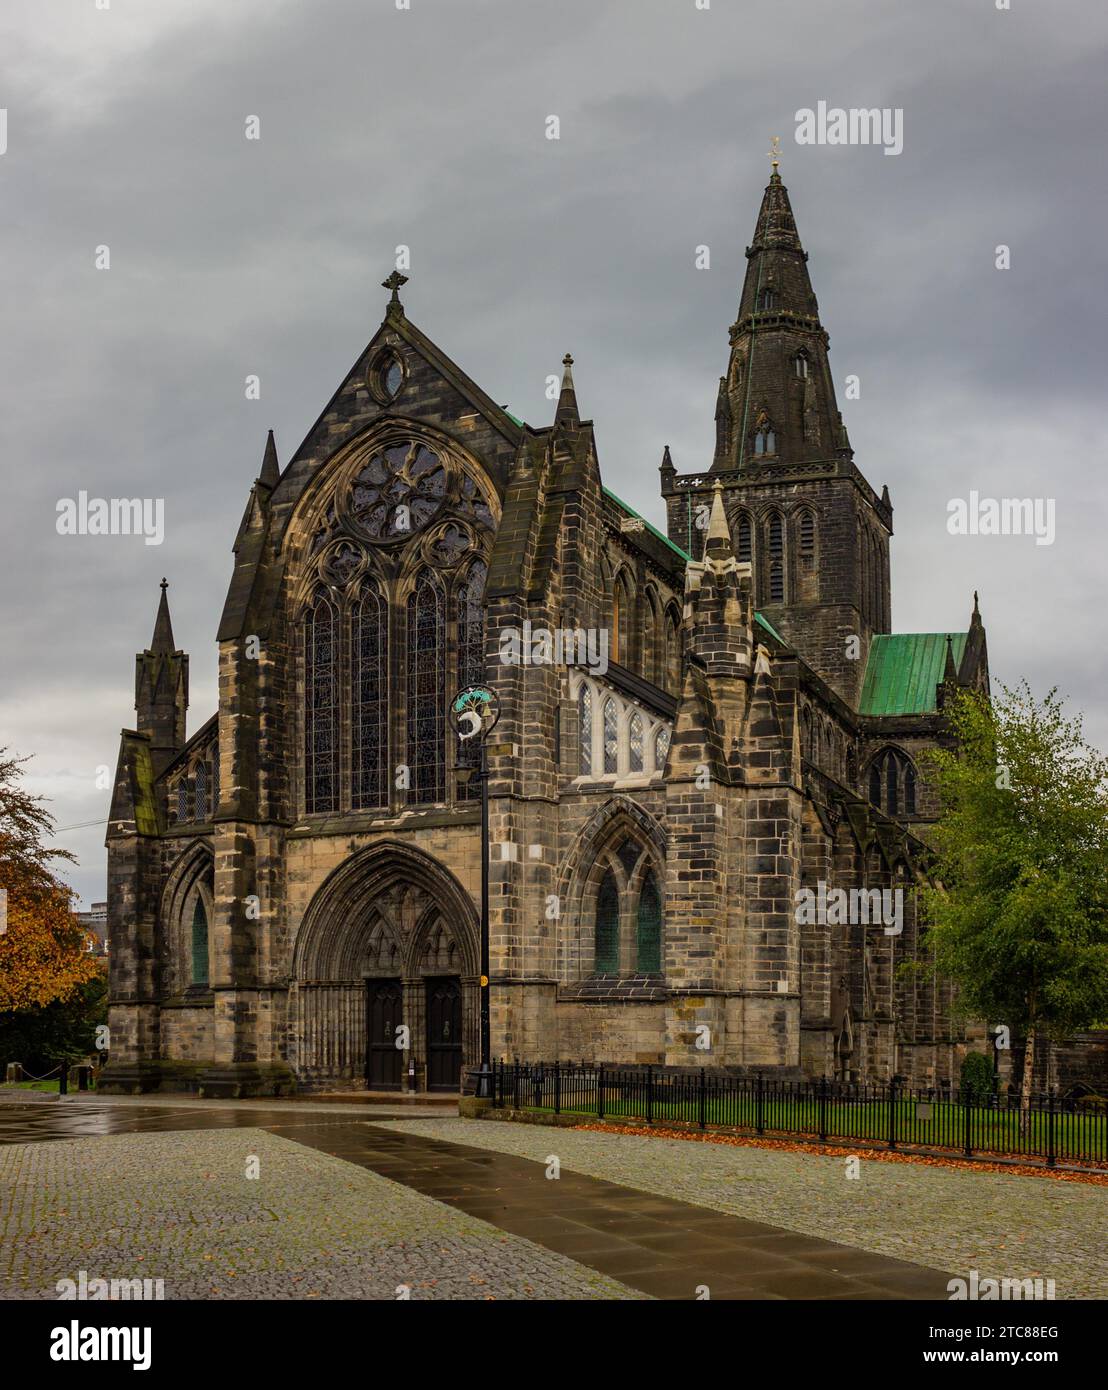 A picture of the Glasgow Cathedral on a rainy day Stock Photo